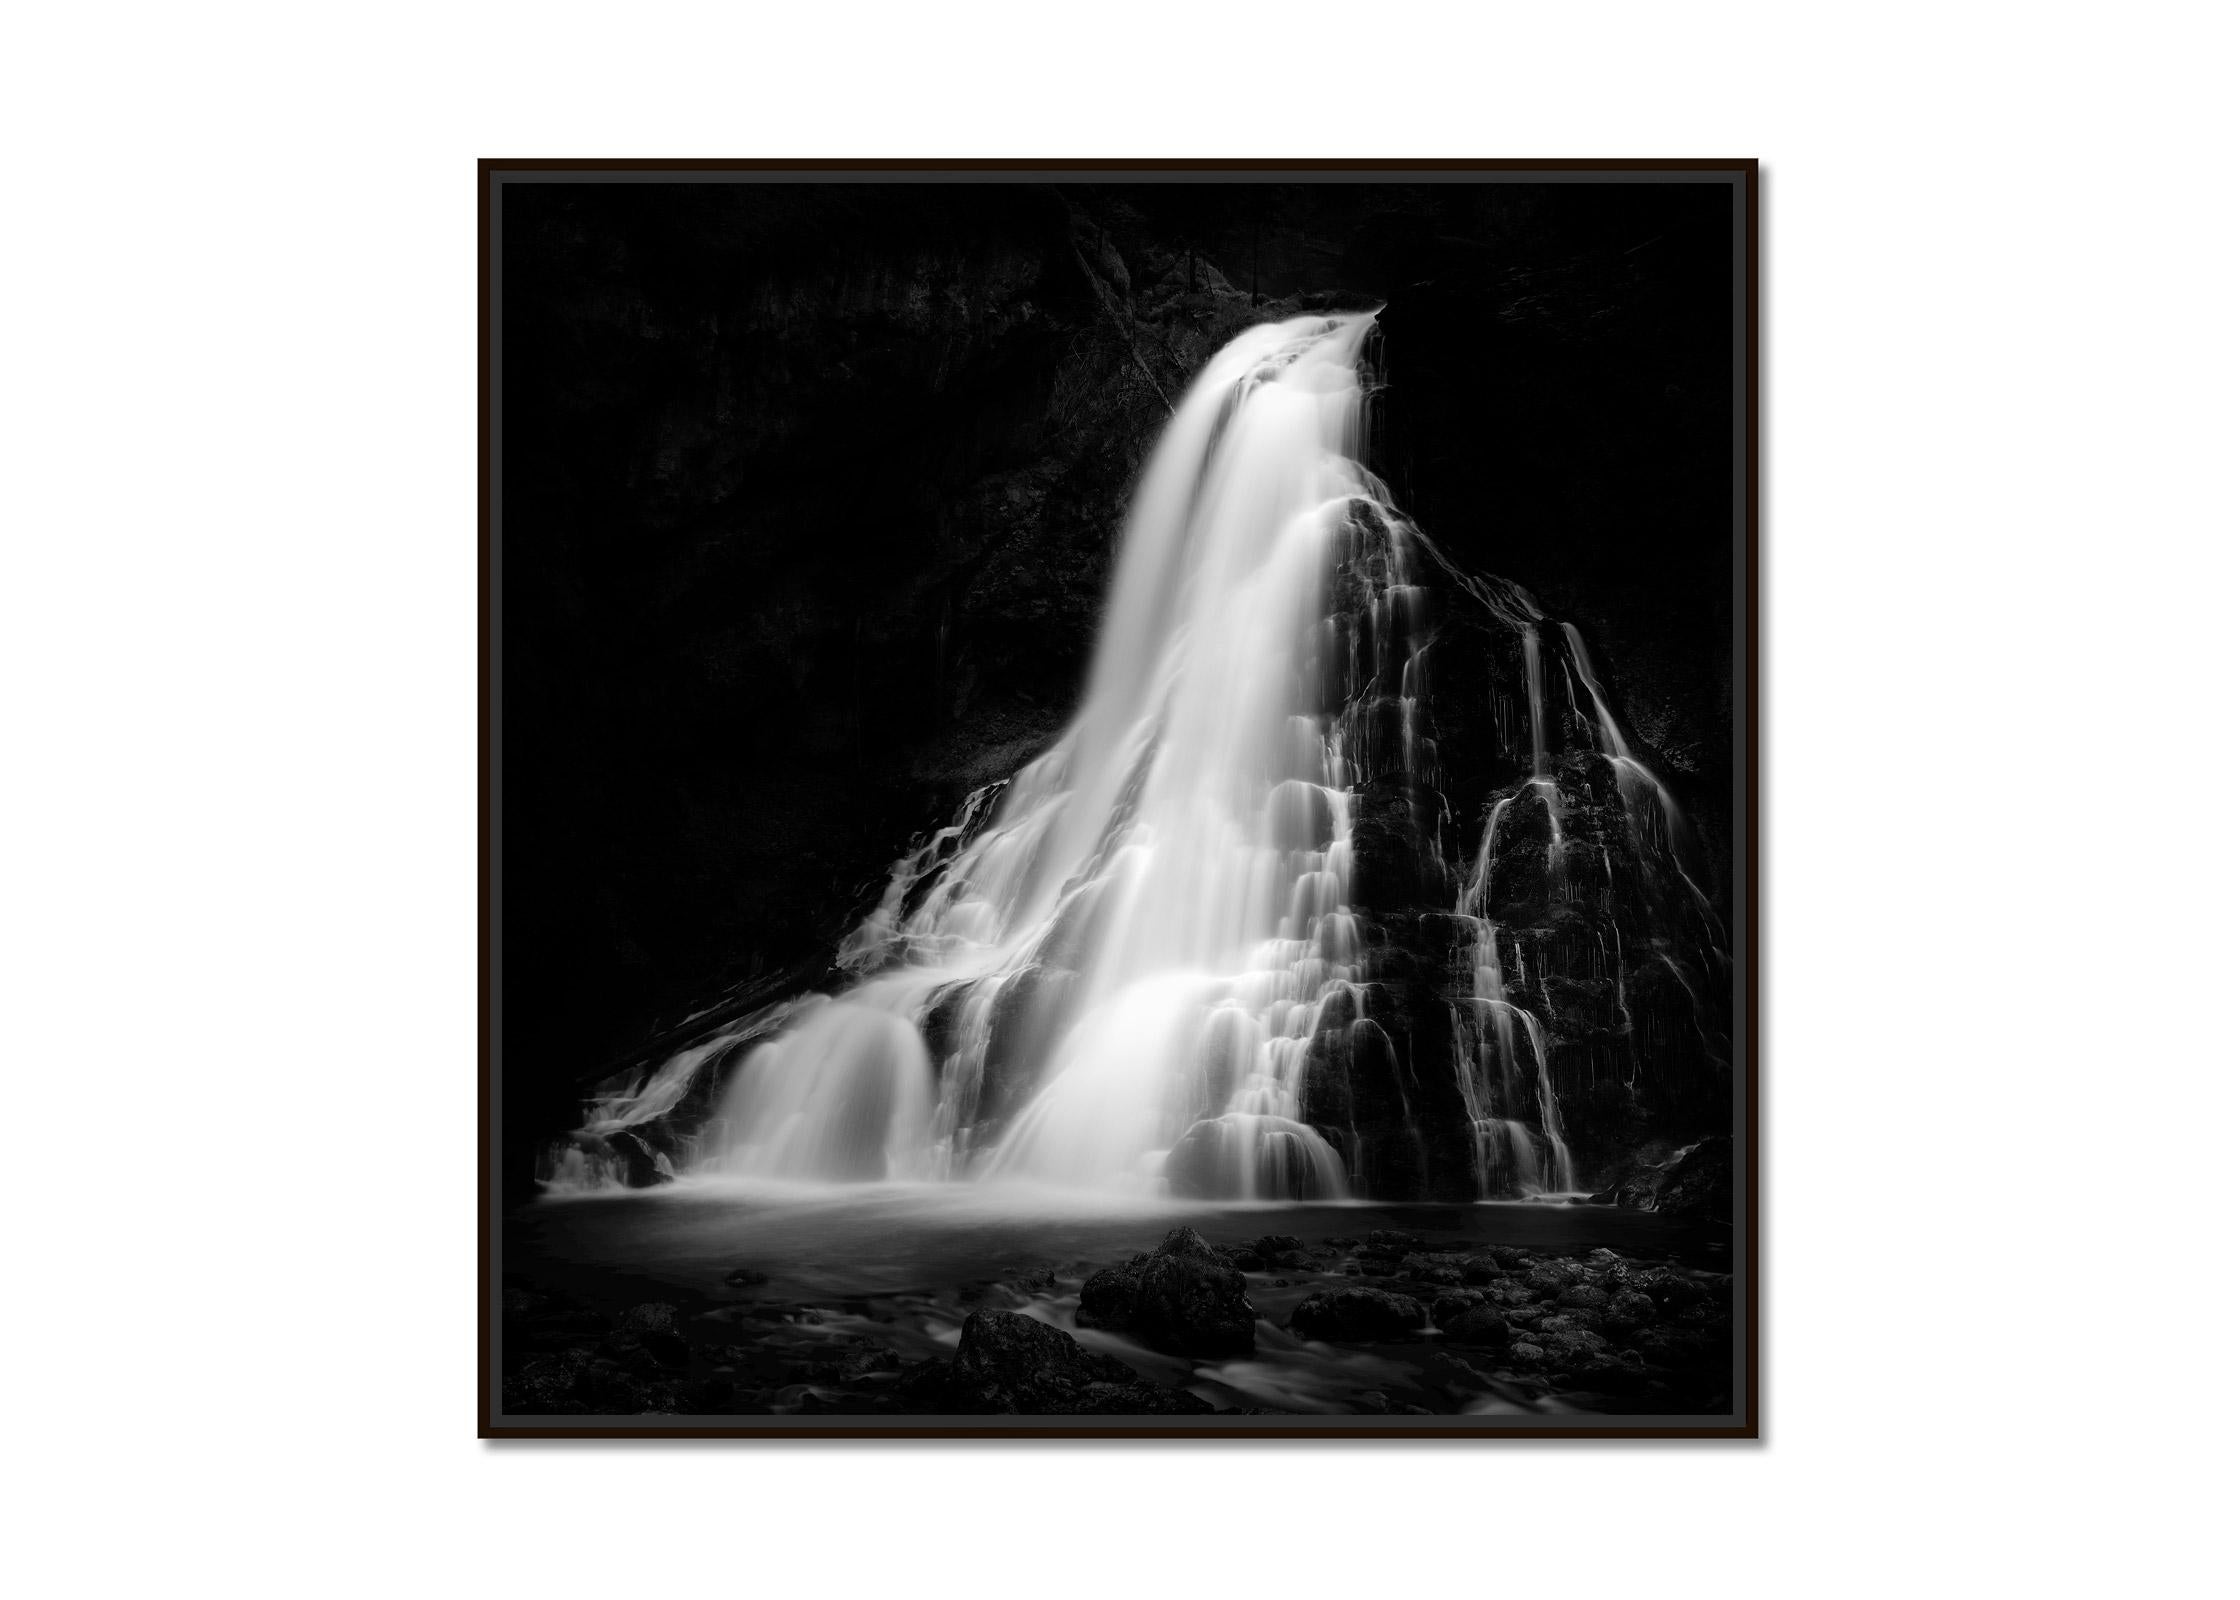 Golling Falls, waterfall, Austria, black and white photography, art landscape - Photograph by Gerald Berghammer